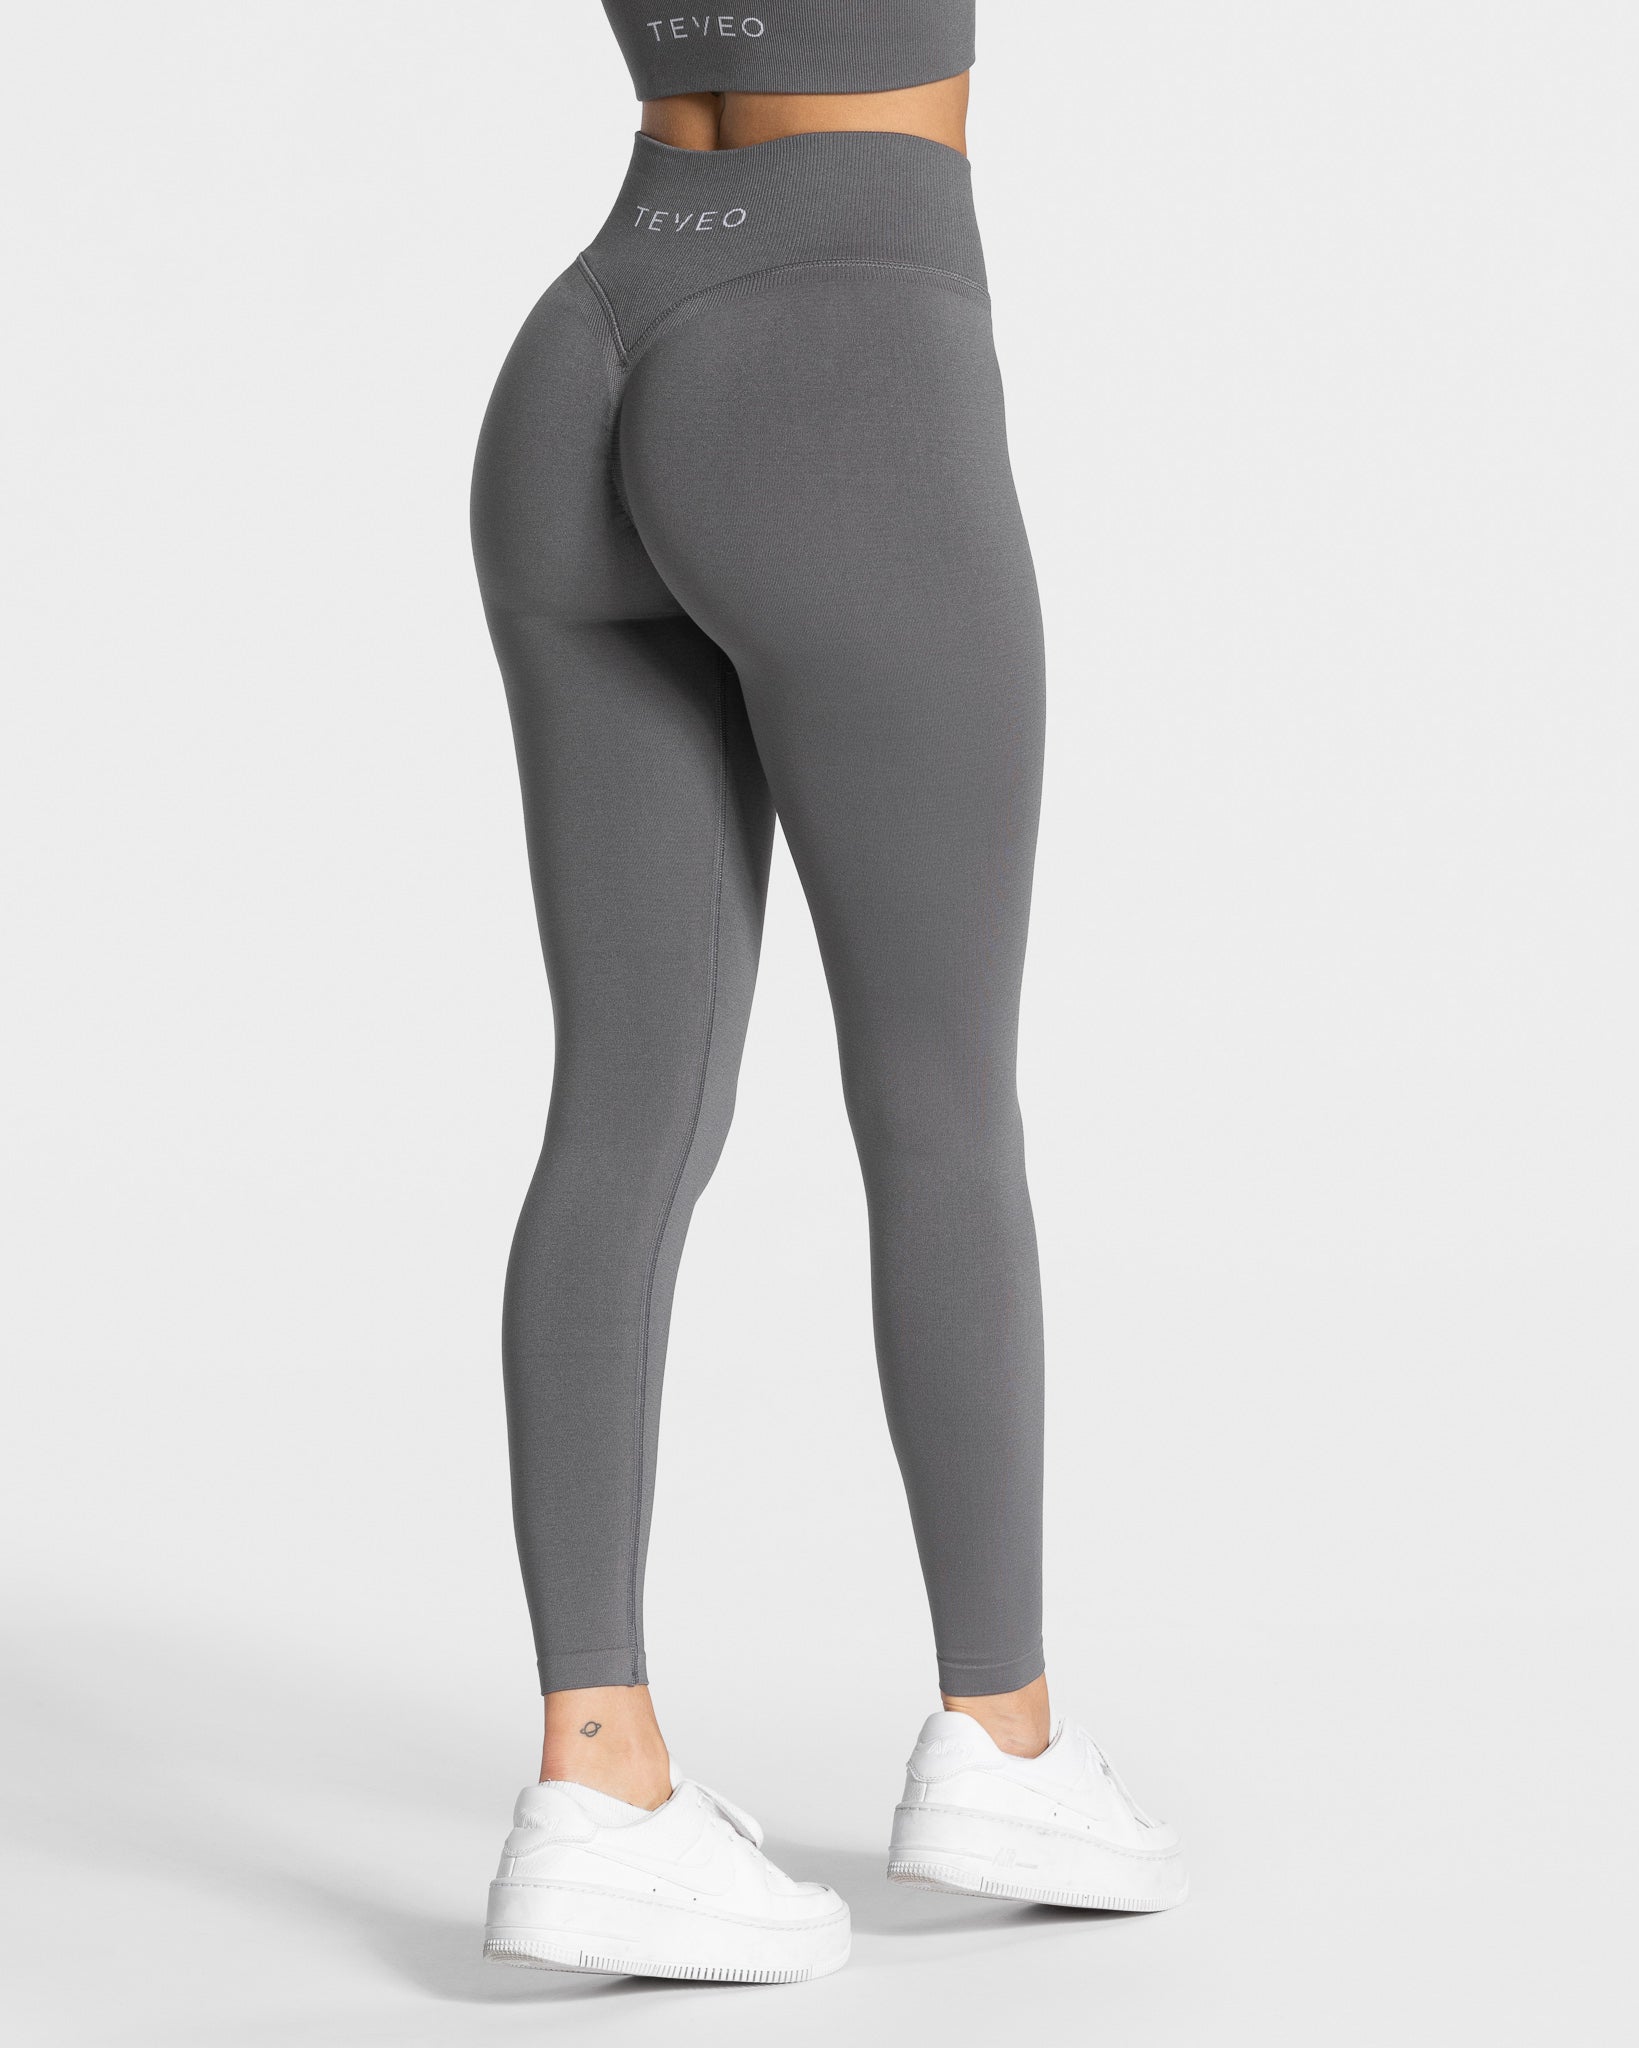 Store Sportbekleidung TEVEO Leggings Official Scrunch | – Statement \